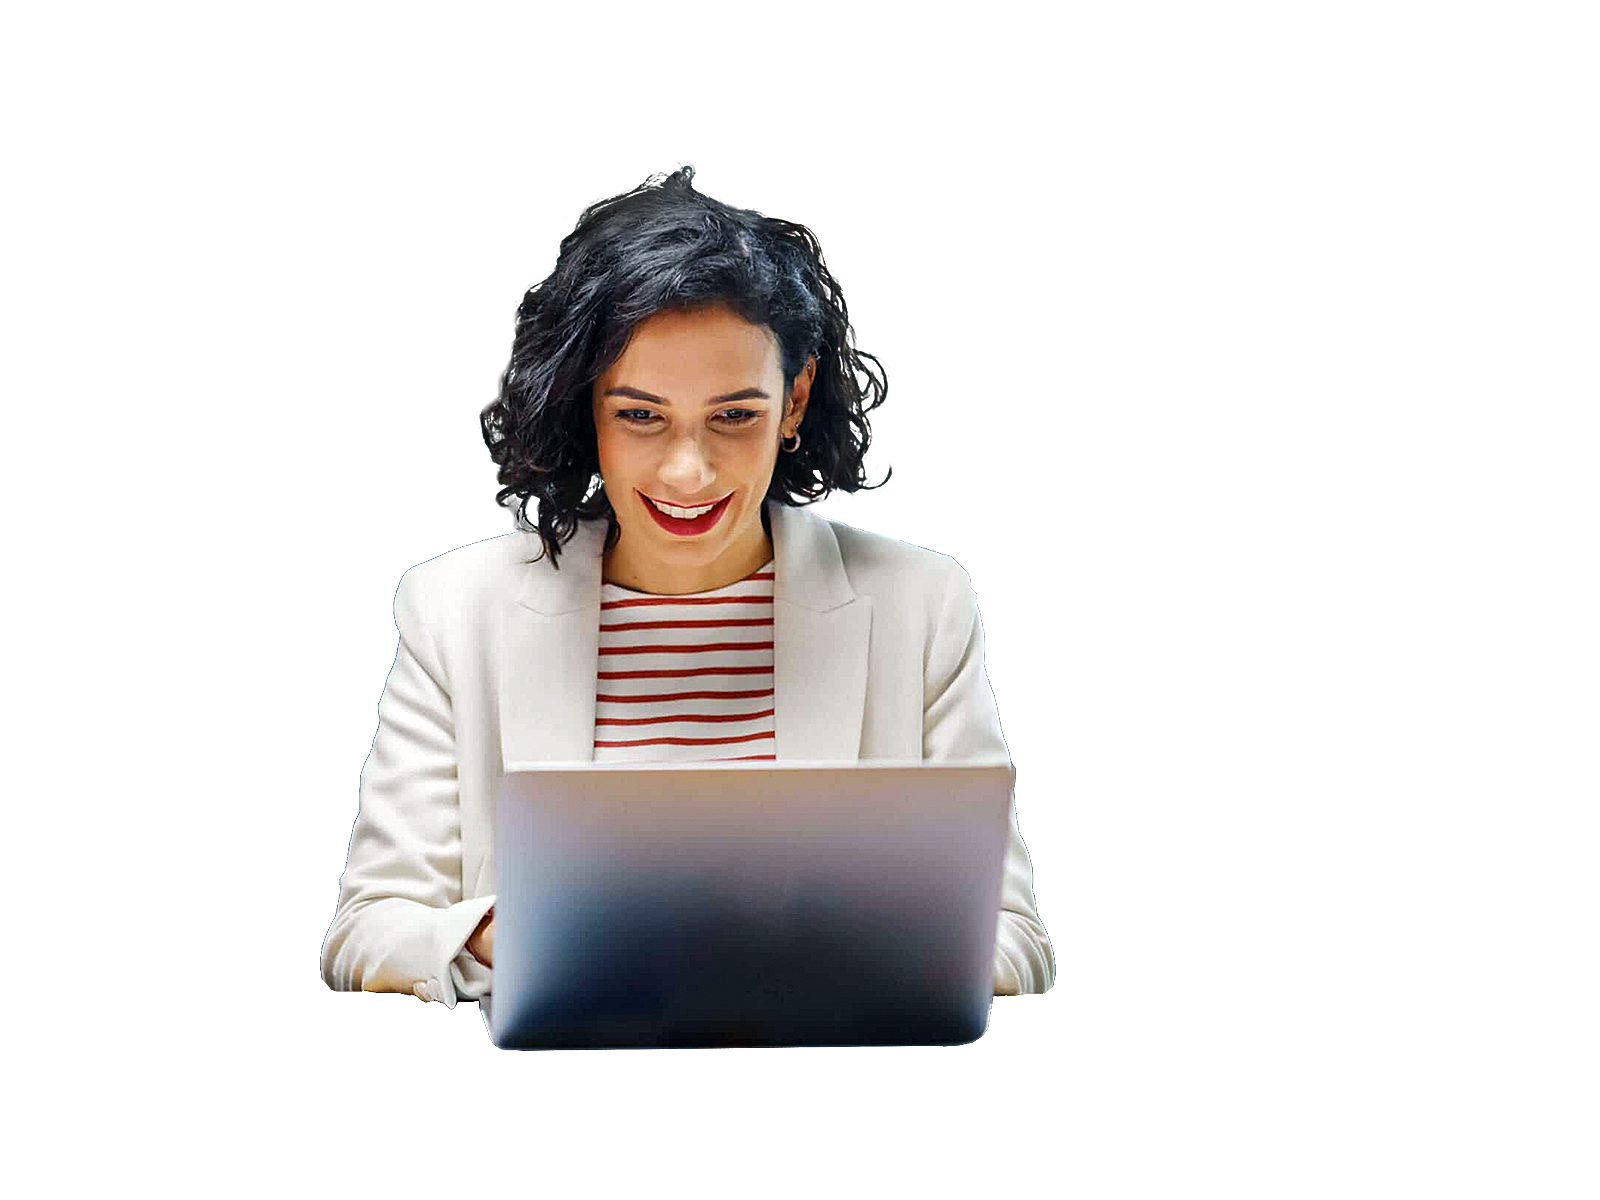 Happy female CIO working on a laptop surrounded by illustrations of data automation including building blocks, a target, and data organized with labels.